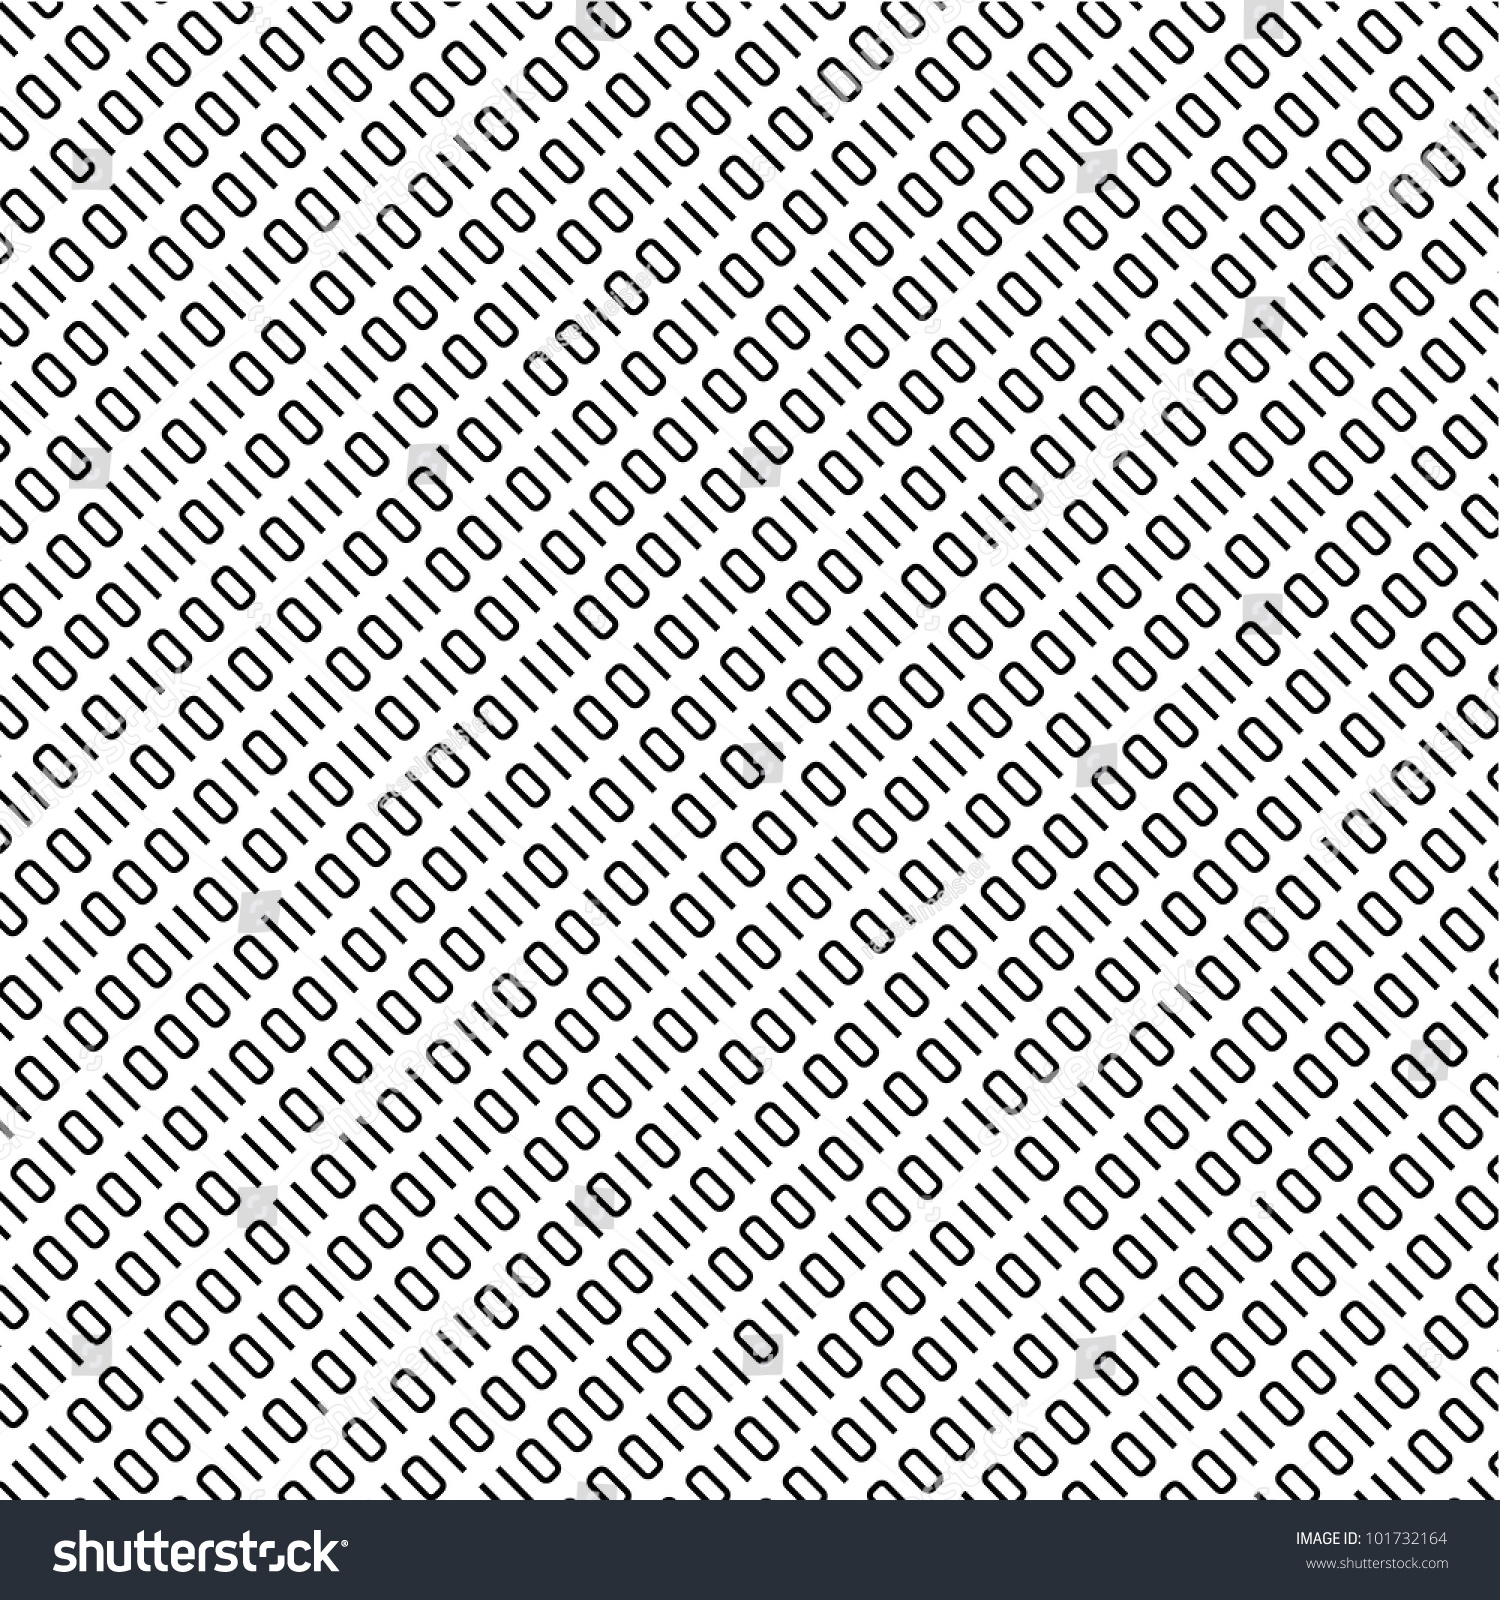 Abstract Black And White Binary Code Background Or Wallpaper Stock ...